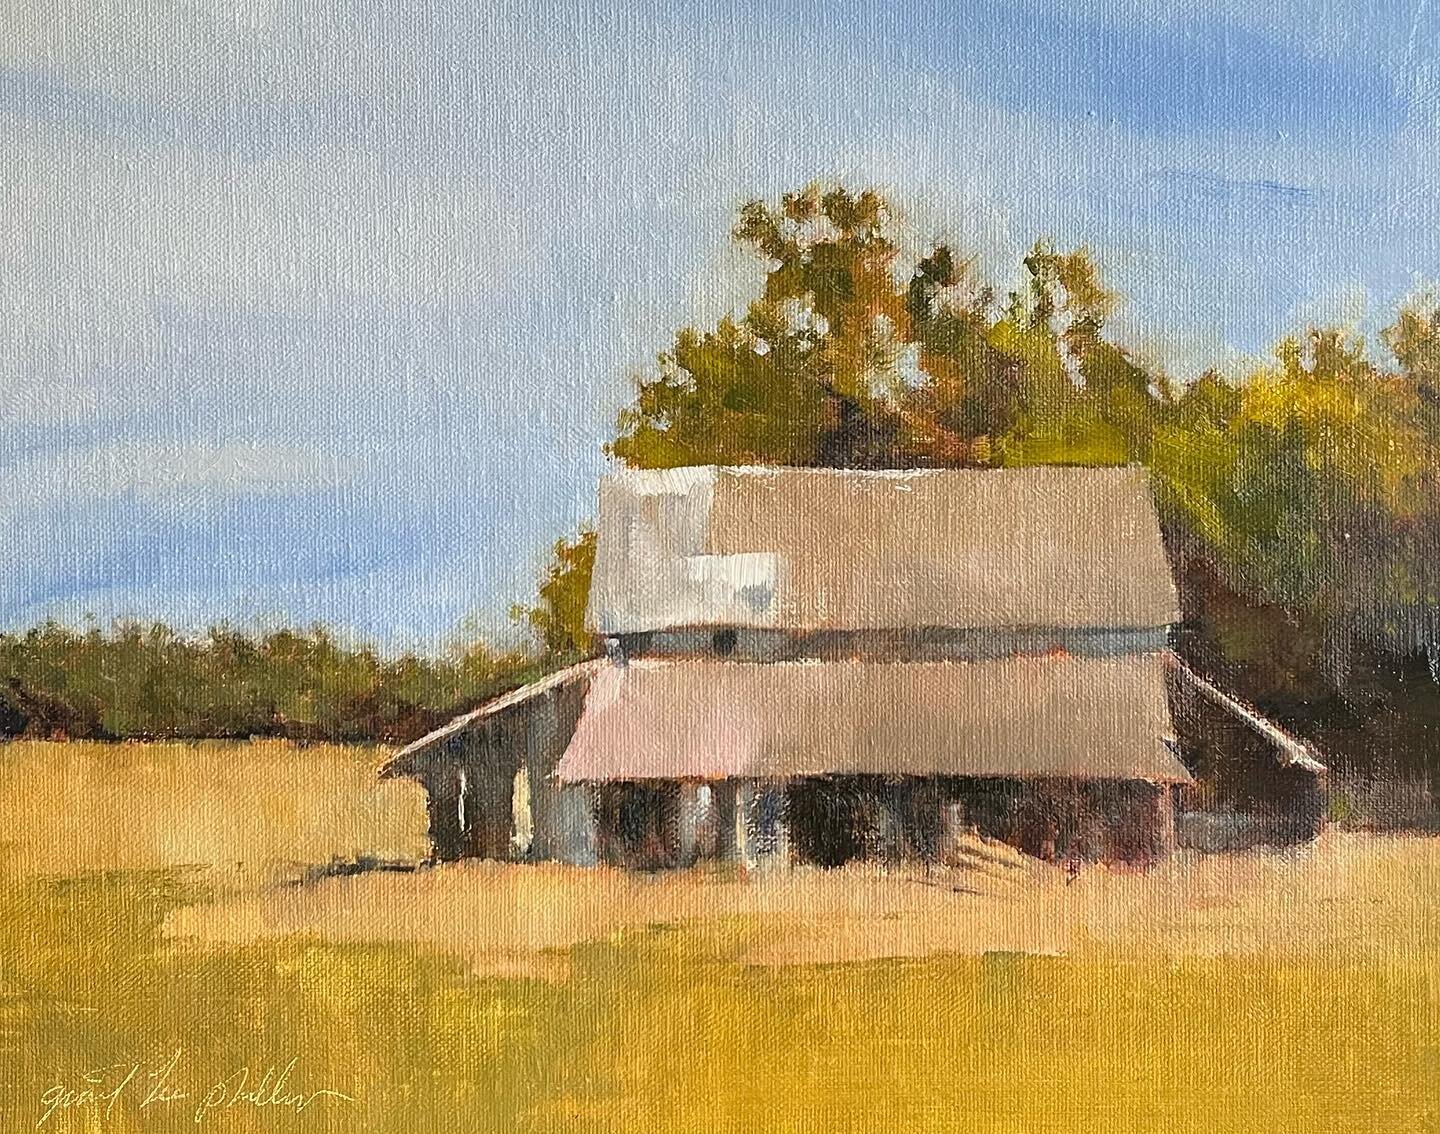 Sacramento Valley. A recent oil based on a photo that I shot along the highway in September. Parched earth, hazy skies made for soft muted tones. Teetering, weathered  structures like this are common here. It&rsquo;s a part of California that I conne